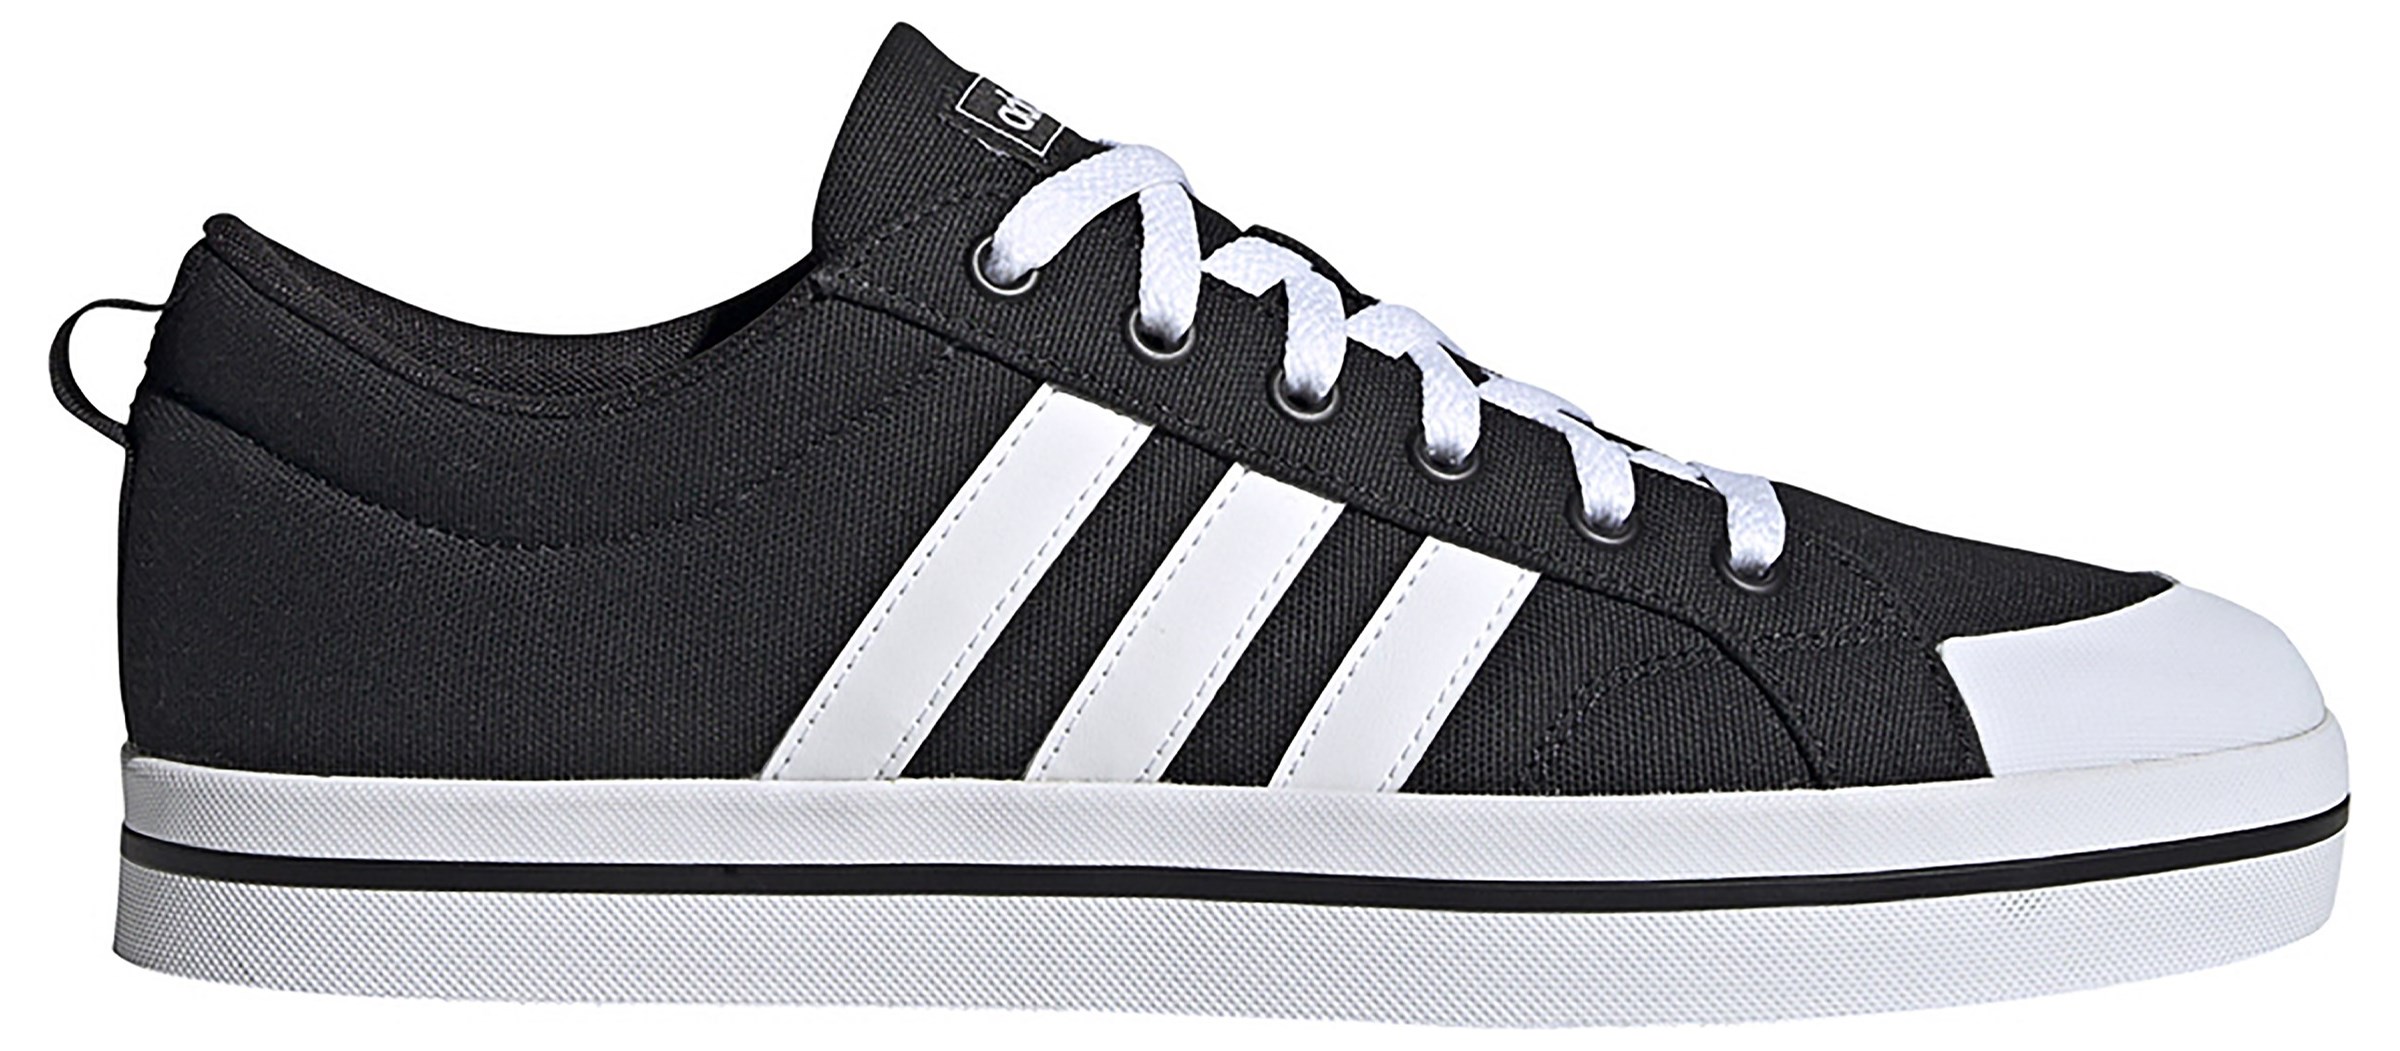 Shop Premium Outlets] adidas Men's Bravada Shoes for $25.20 (with Code  ADIDAS40. Shipping is free.) : r/SneakerDeals